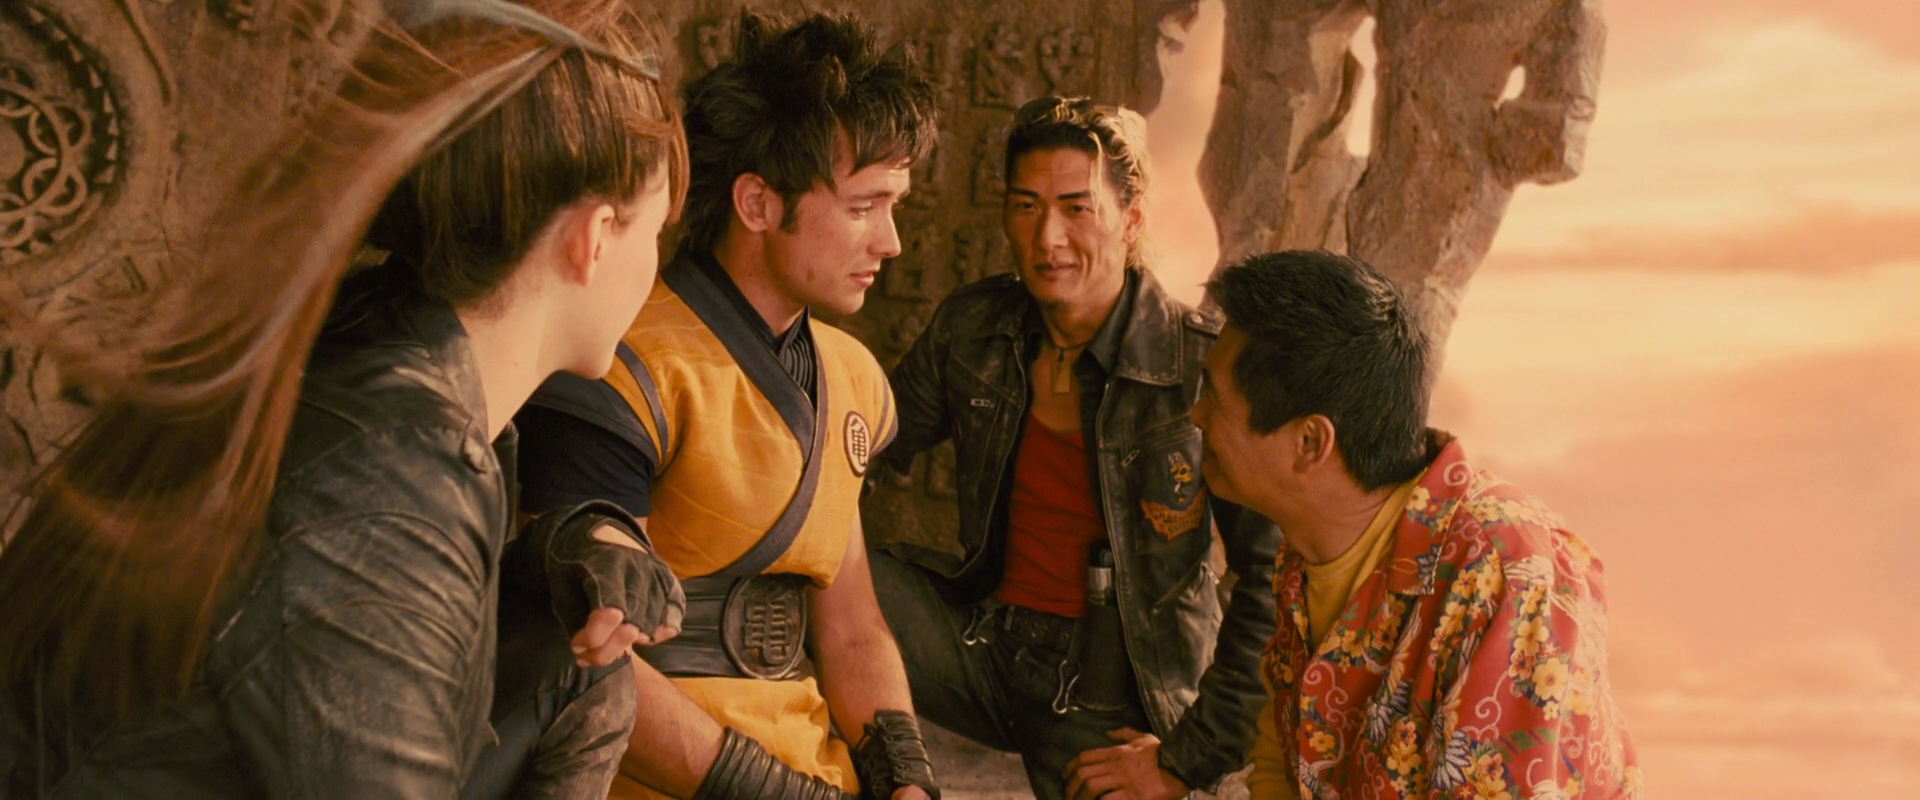 dragonball-evolution-writer-pens-an-apology-to-fans-7-years-later